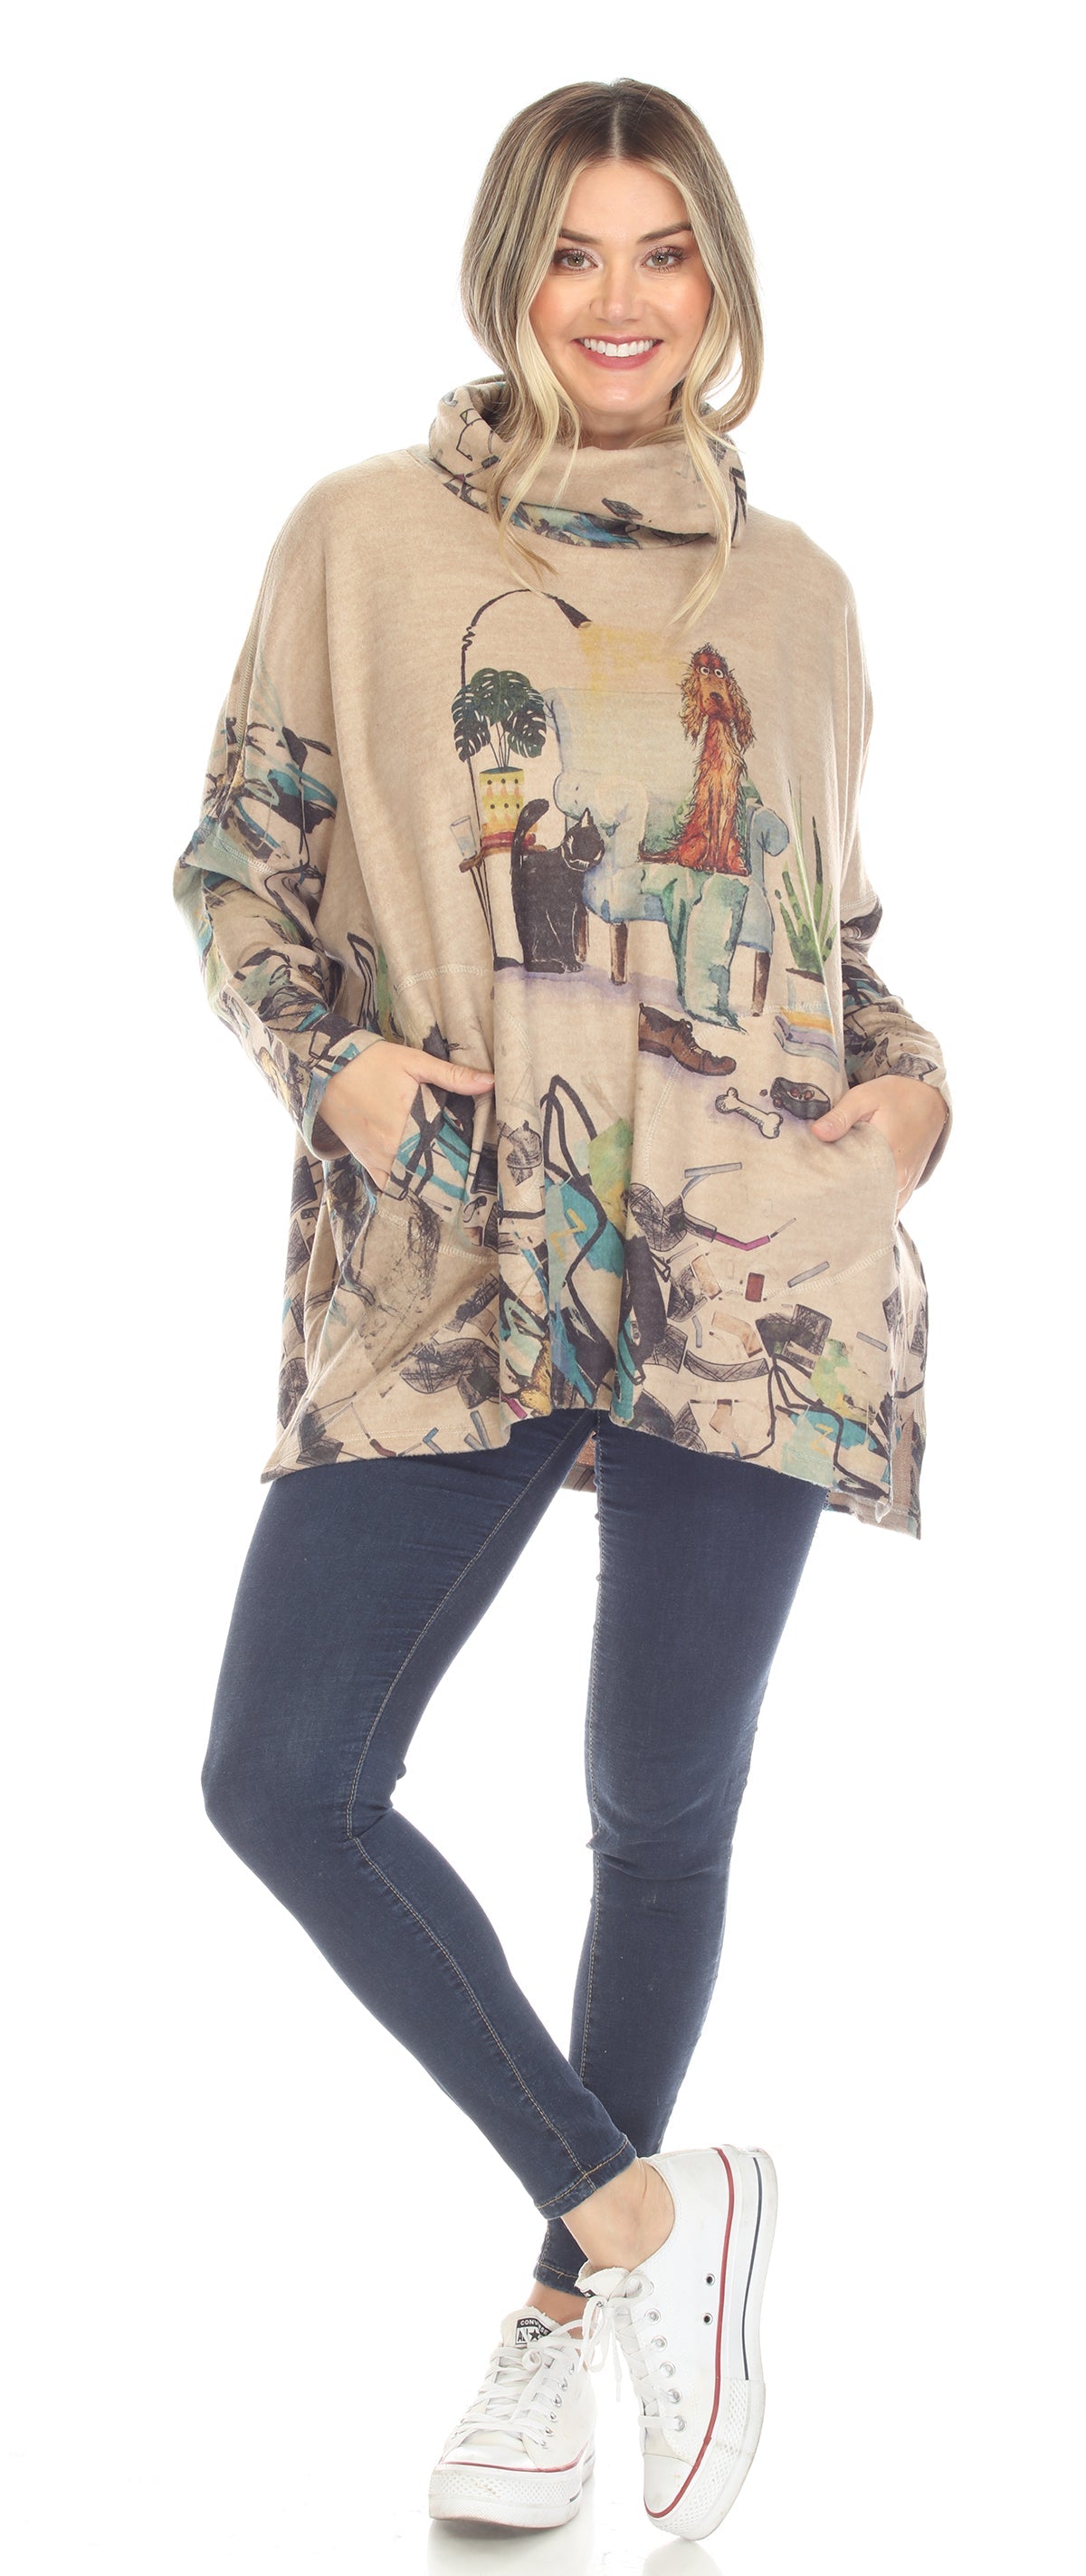 Women's Turtleneck Lightweight Sweater with Whimsy Animals 